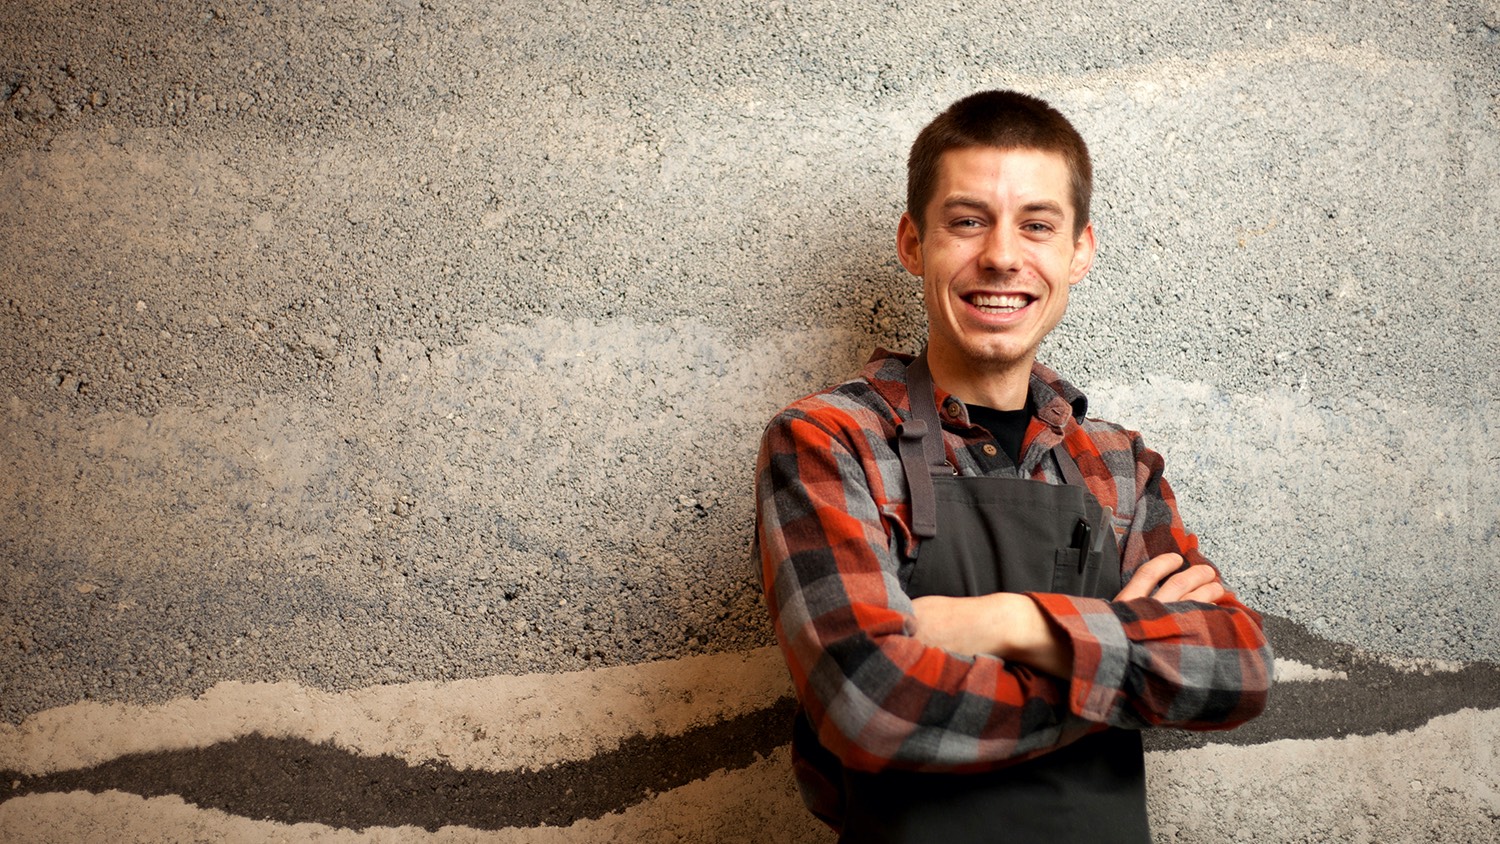 Yannick LaSalle, the chef behind Les Fougères draws inspiration from around the world